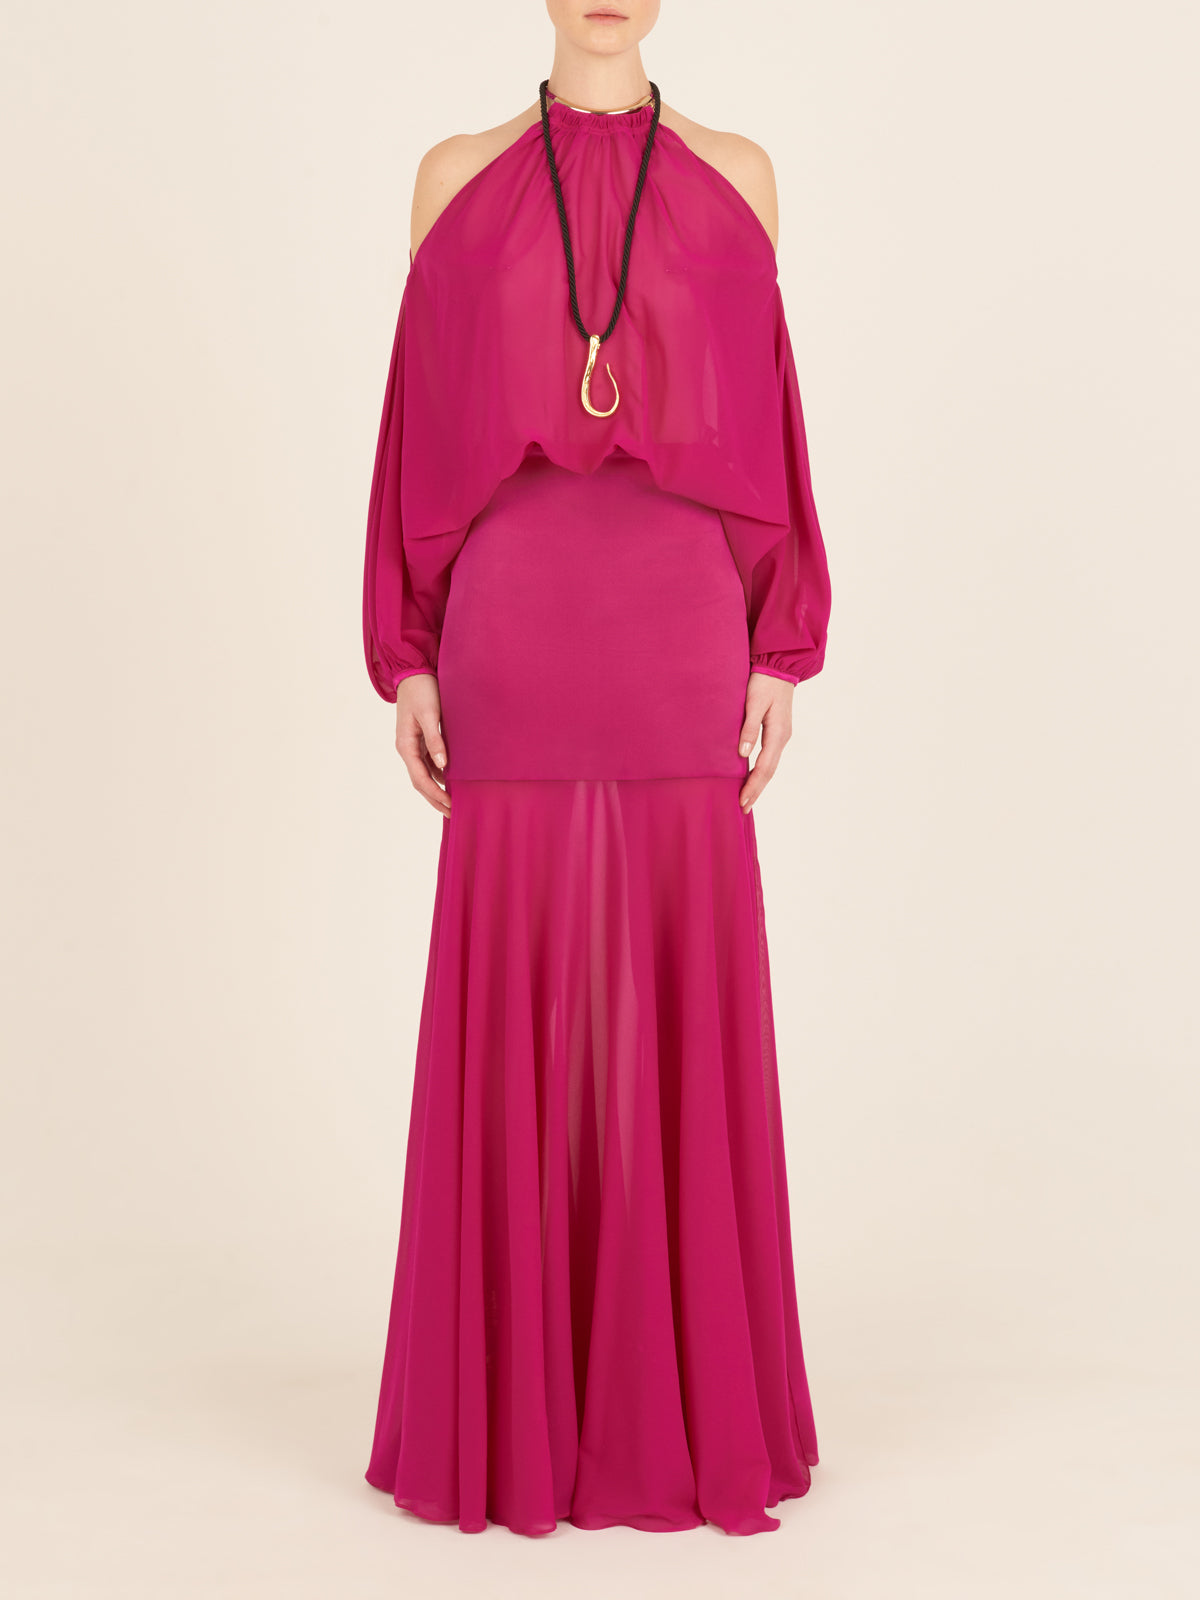 Isadora Dress Fuchsia with sheer long sleeves and a high neck, displayed on a white background.